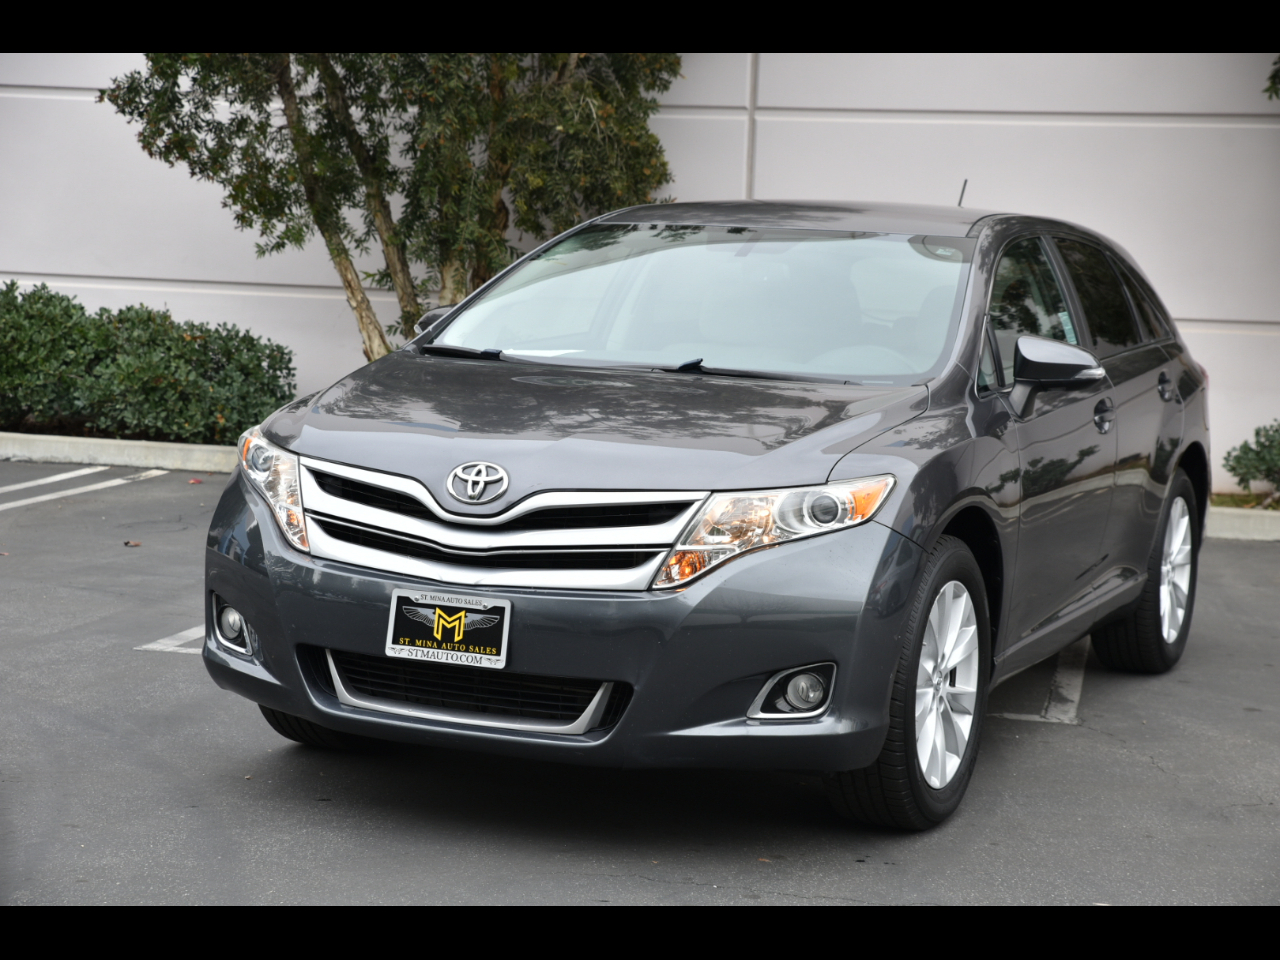 Toyota Venza 4D SUV FWD 4cyl 2015